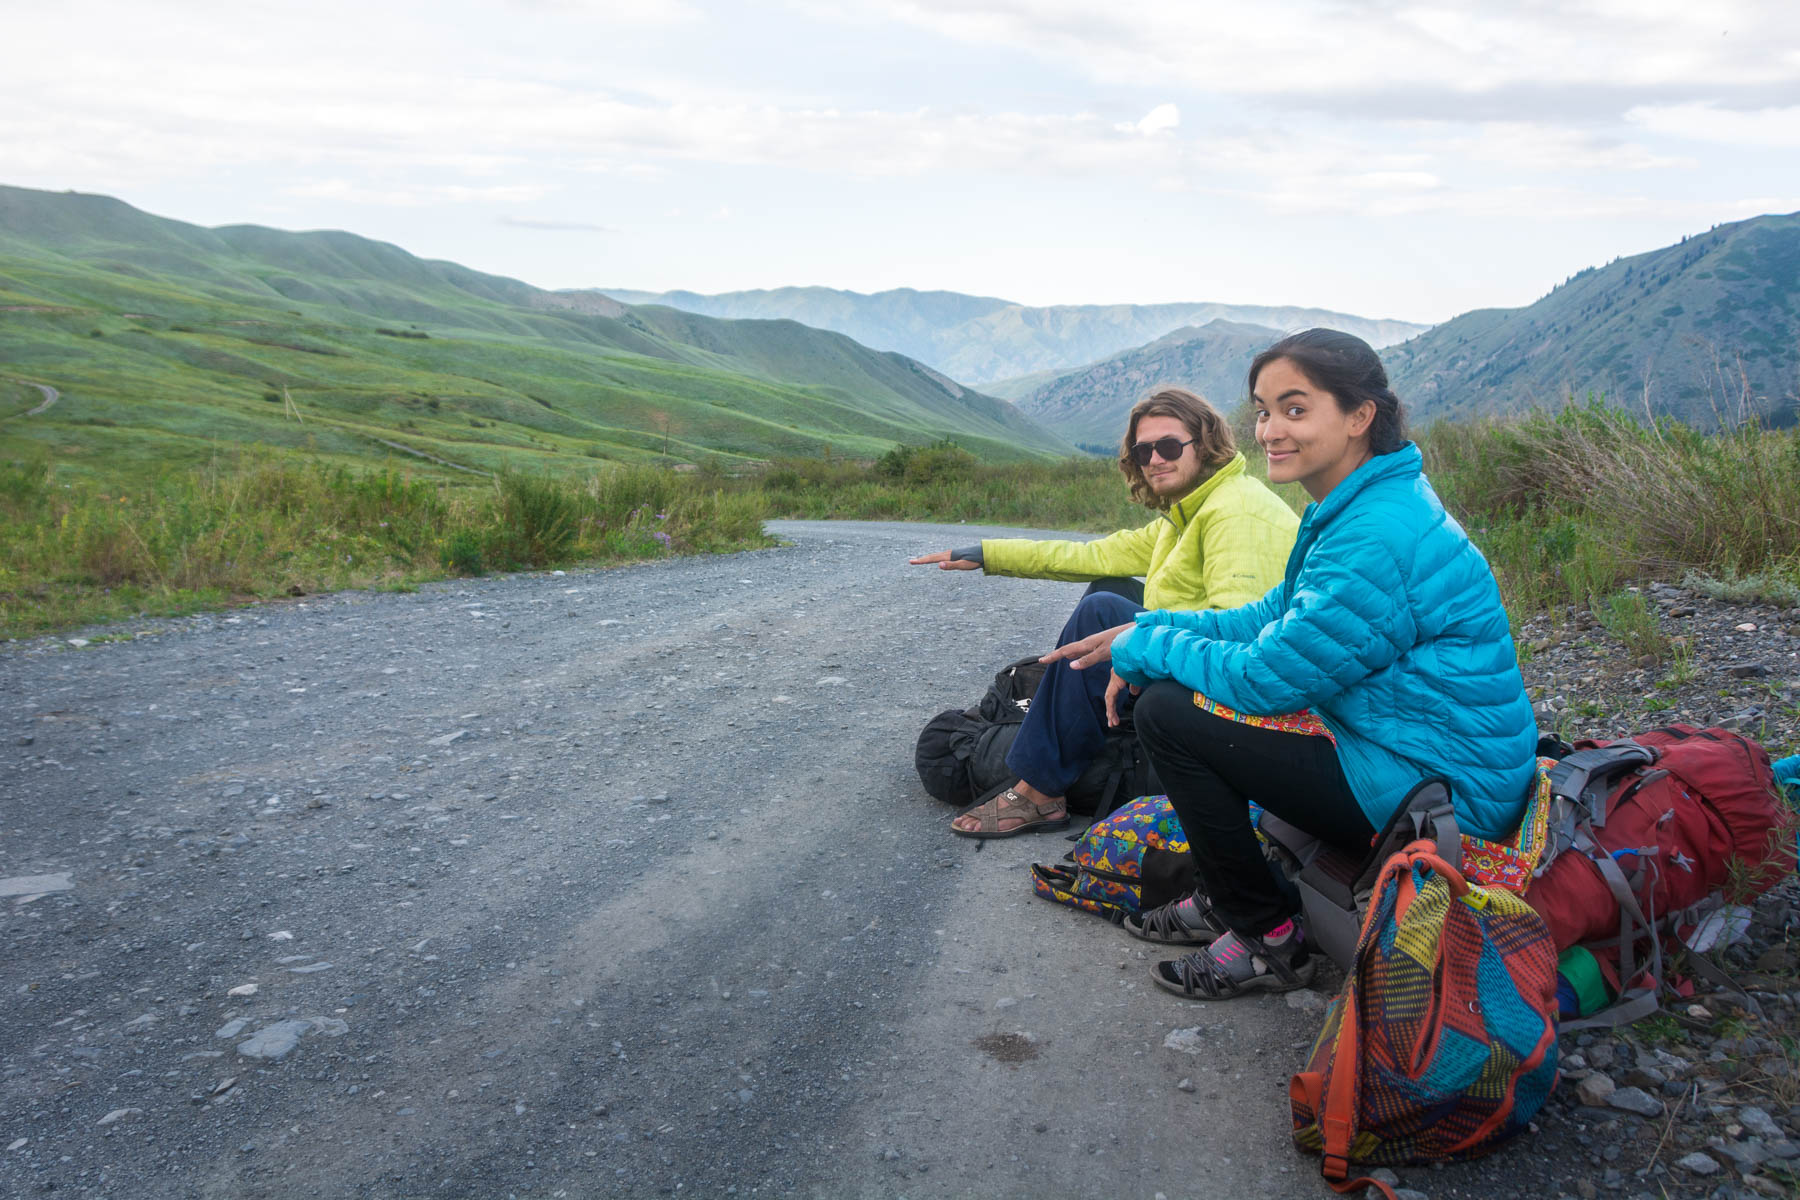 Hitchhiking in Kazakhstan - Lost With Purpose